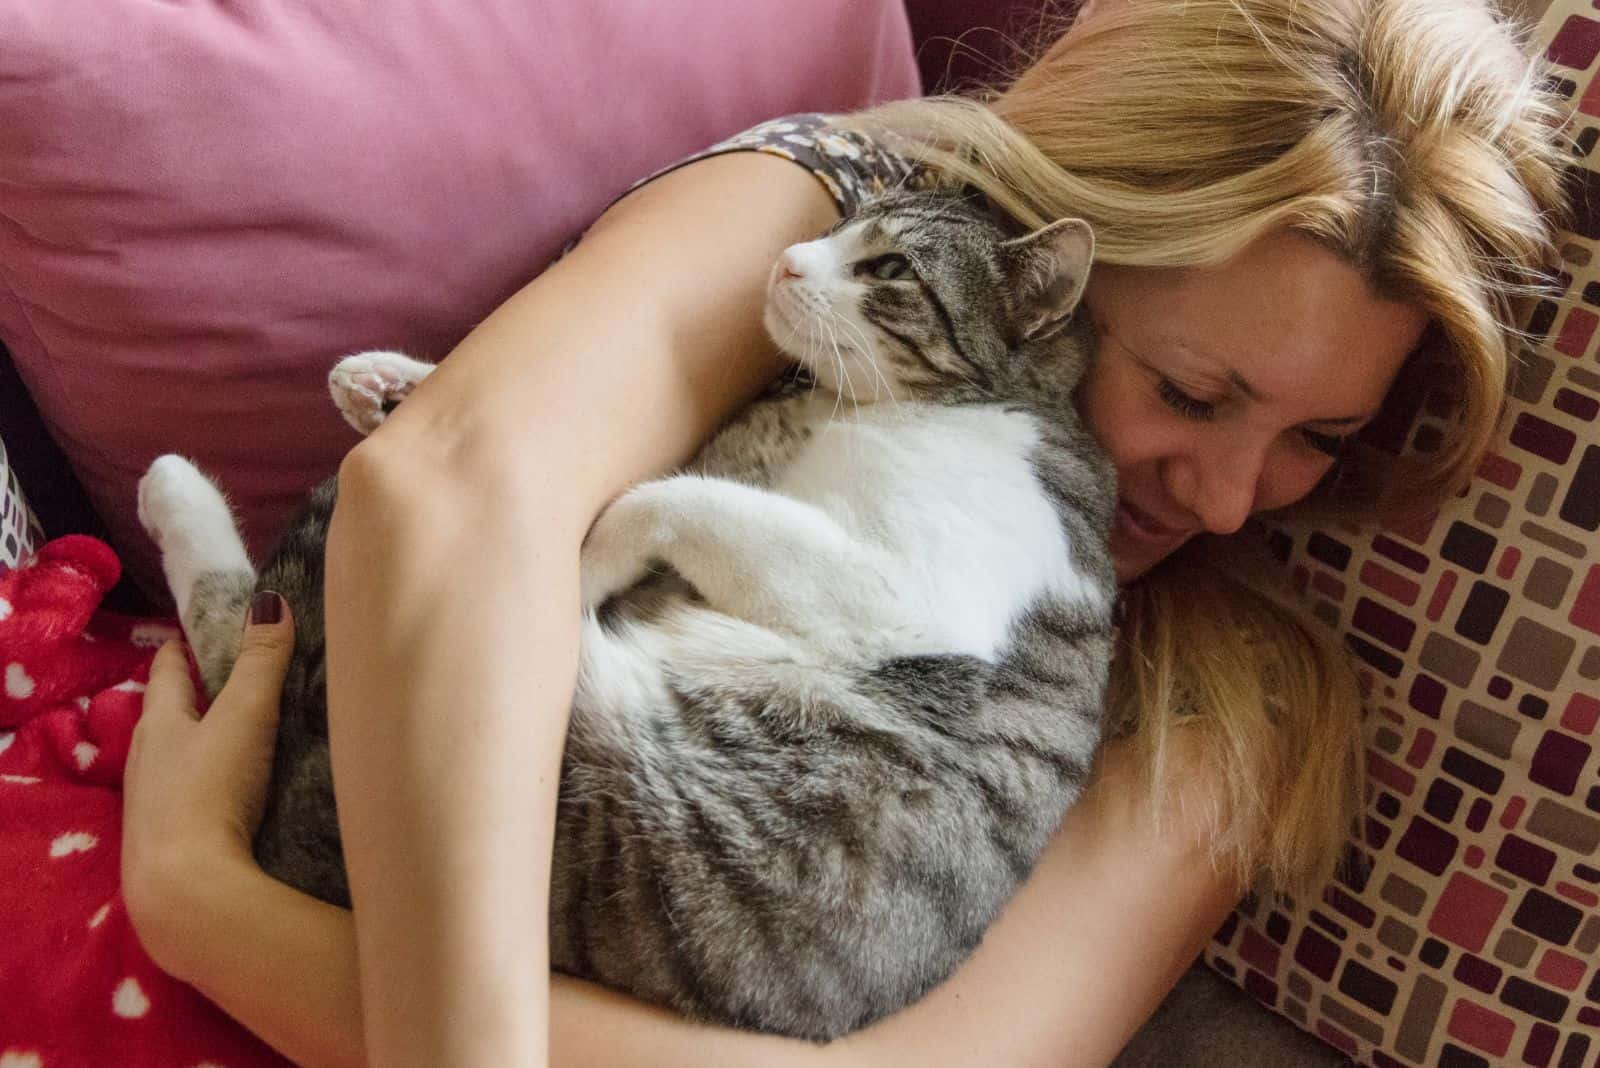 woman and a cat cuddling while lying on the couch